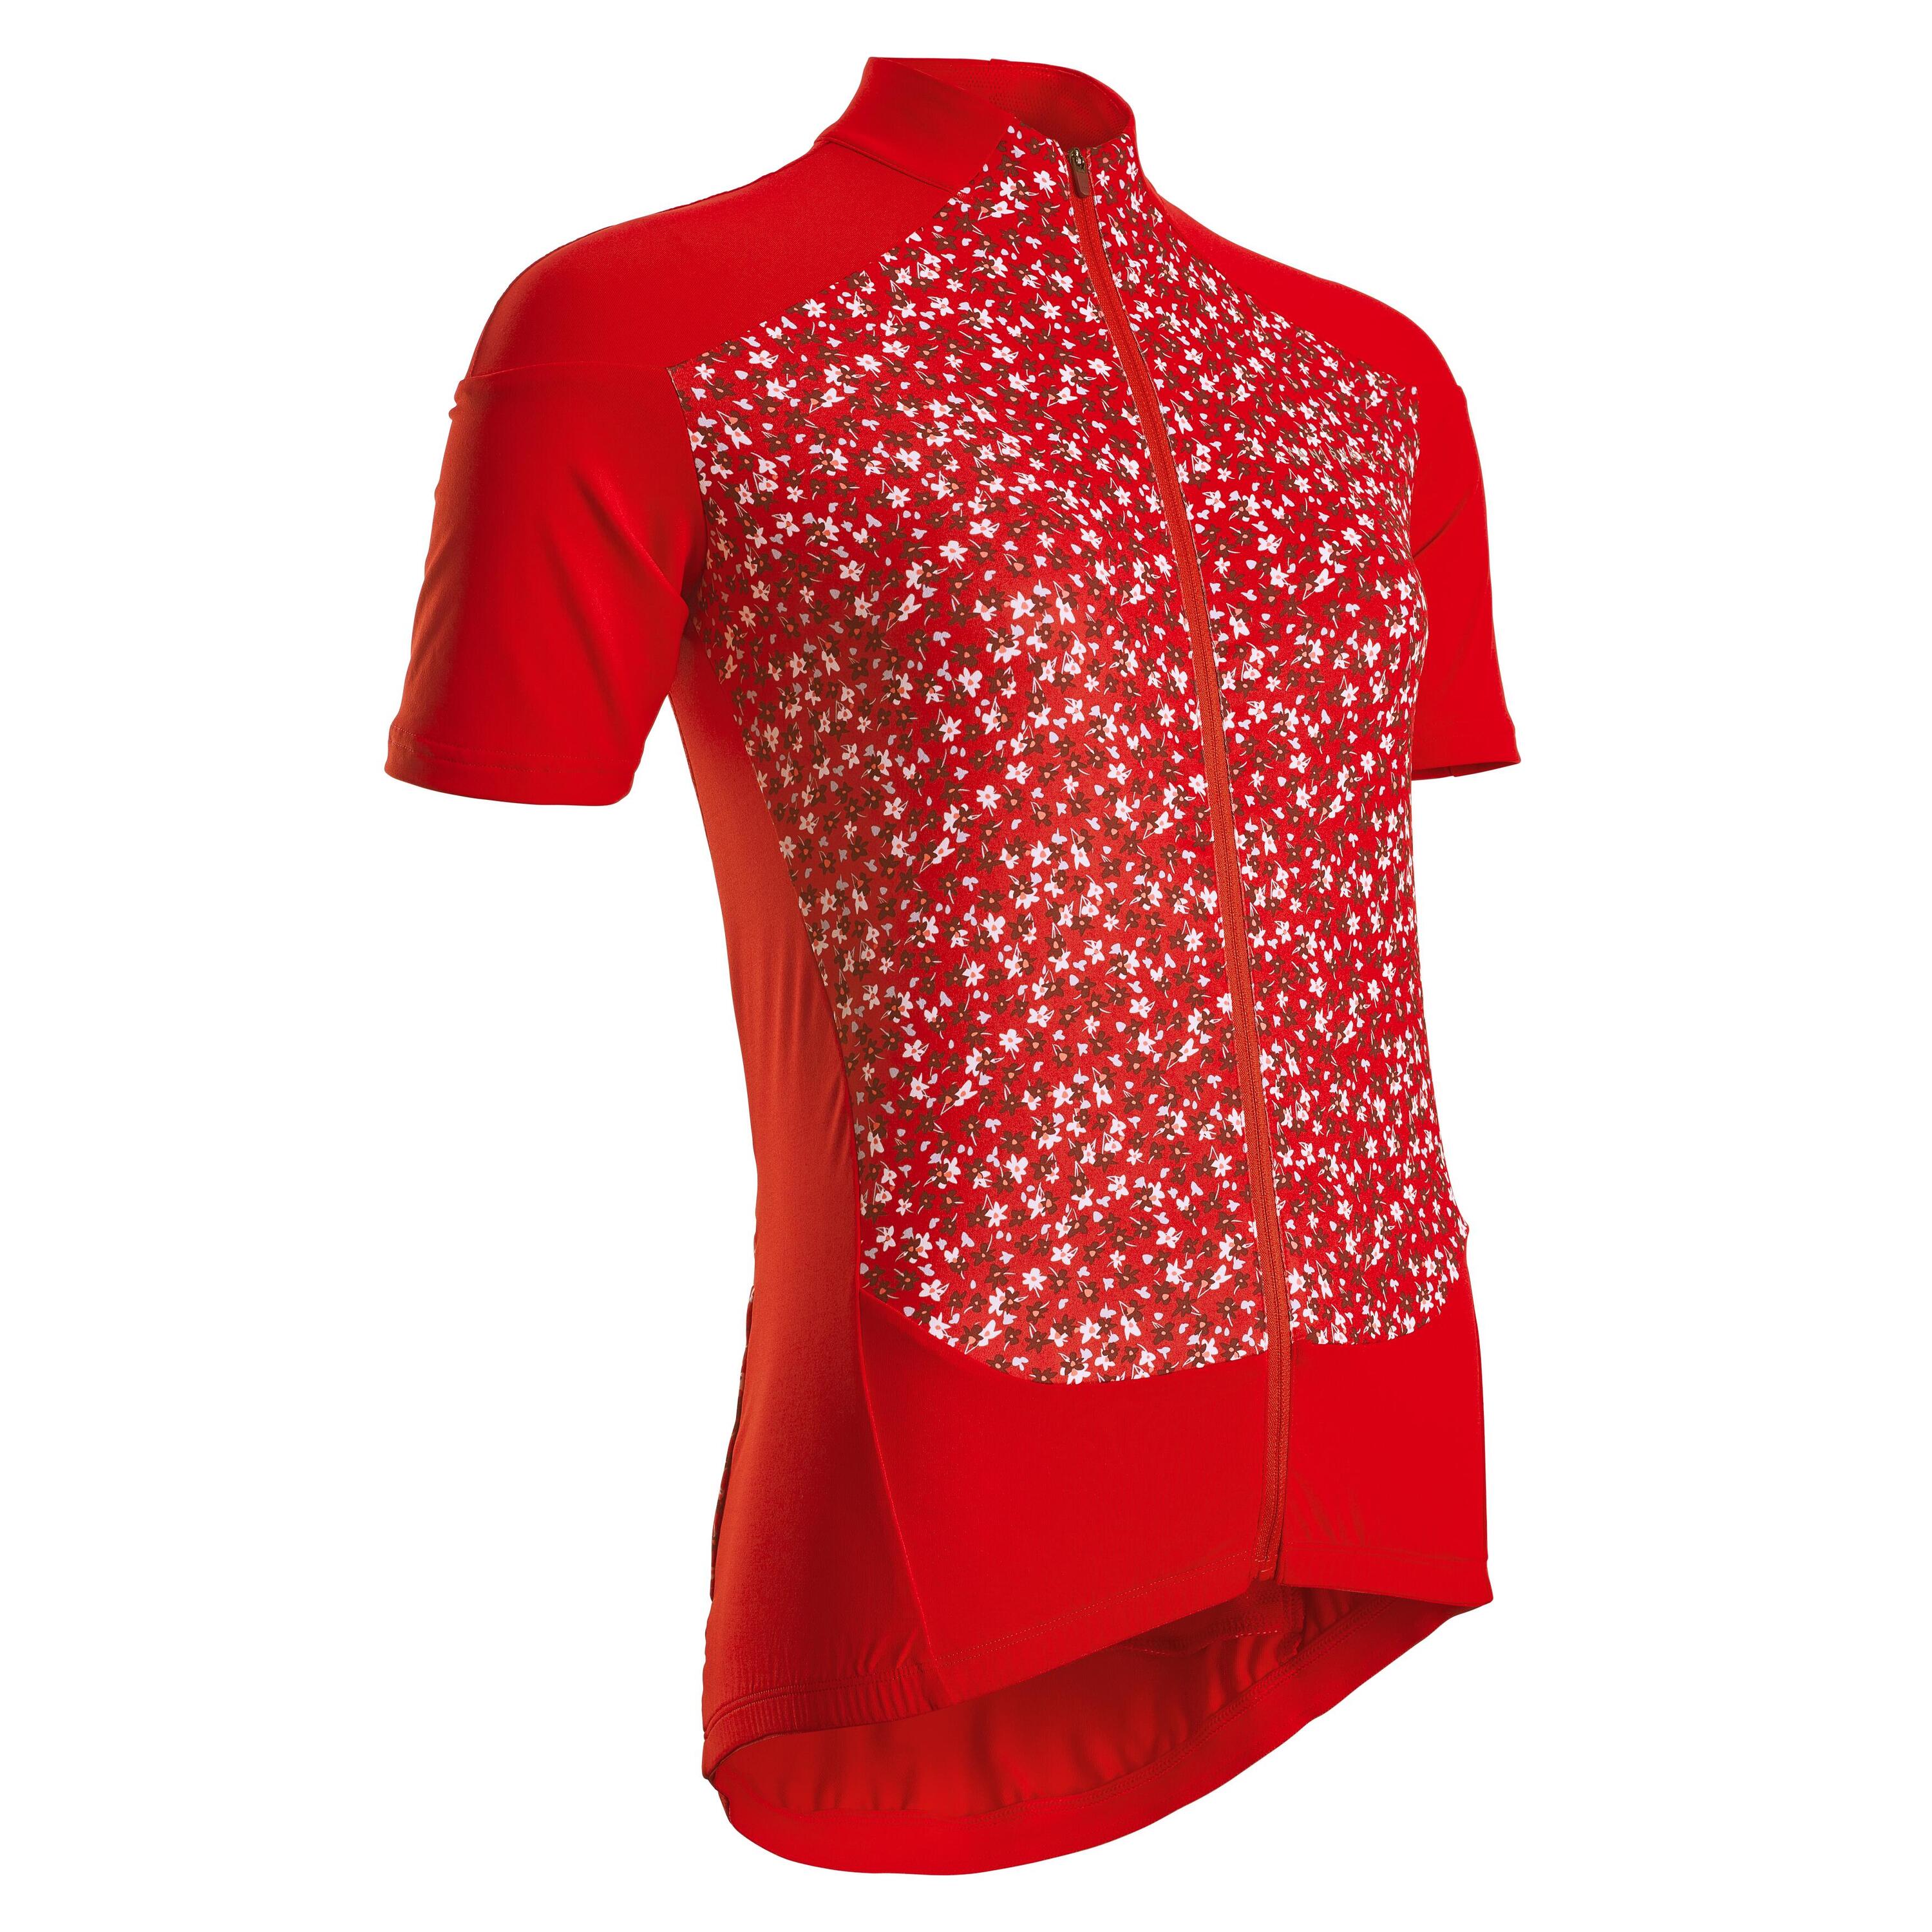 Women's Short-Sleeved Road Cycling Jersey RC500 - Floral/Red 1/7